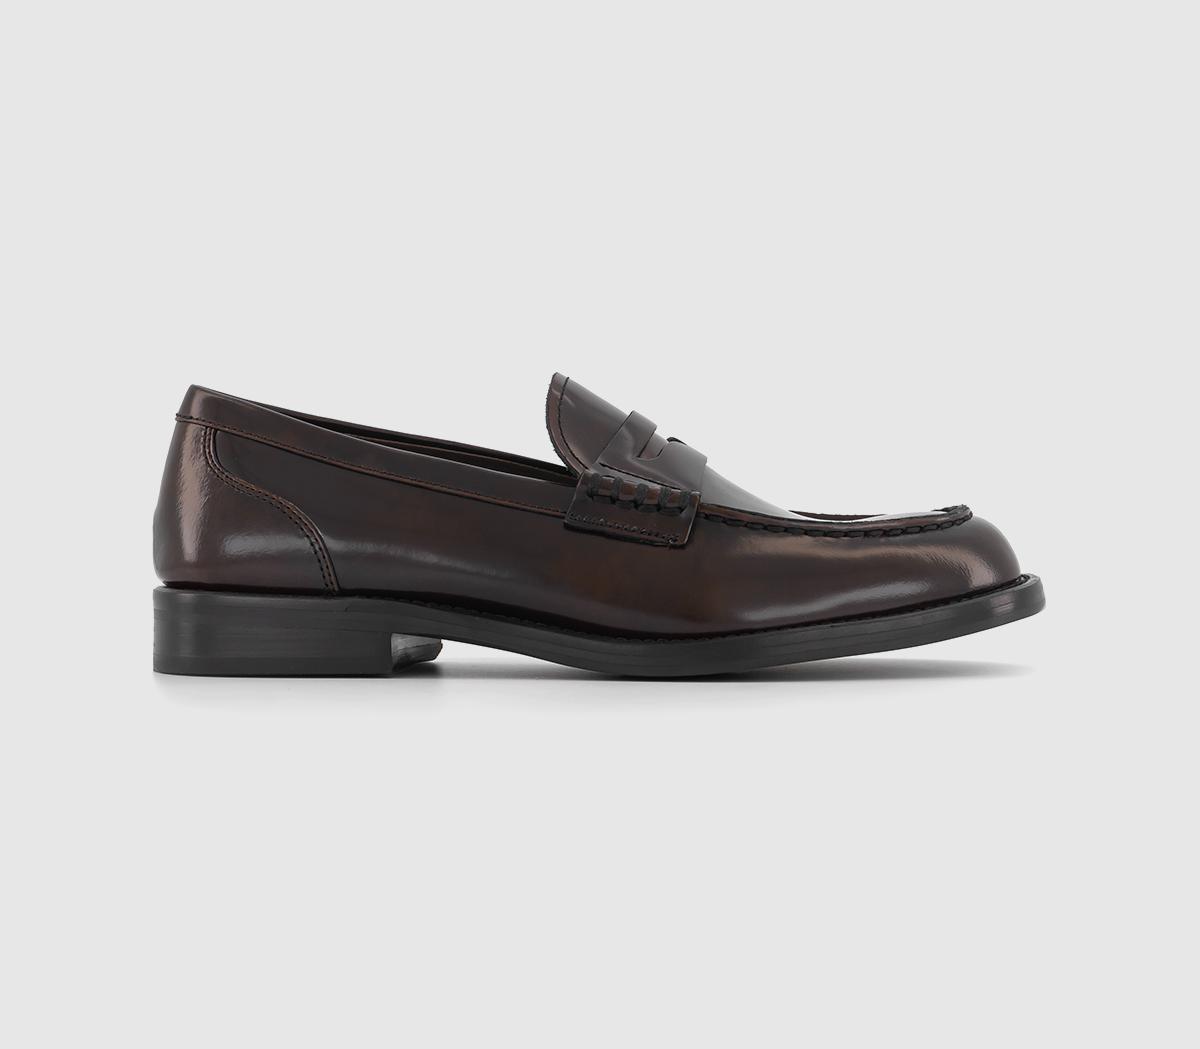 Atelier by Vagabond Naima Loafers Chestnut - Flat Shoes for Women